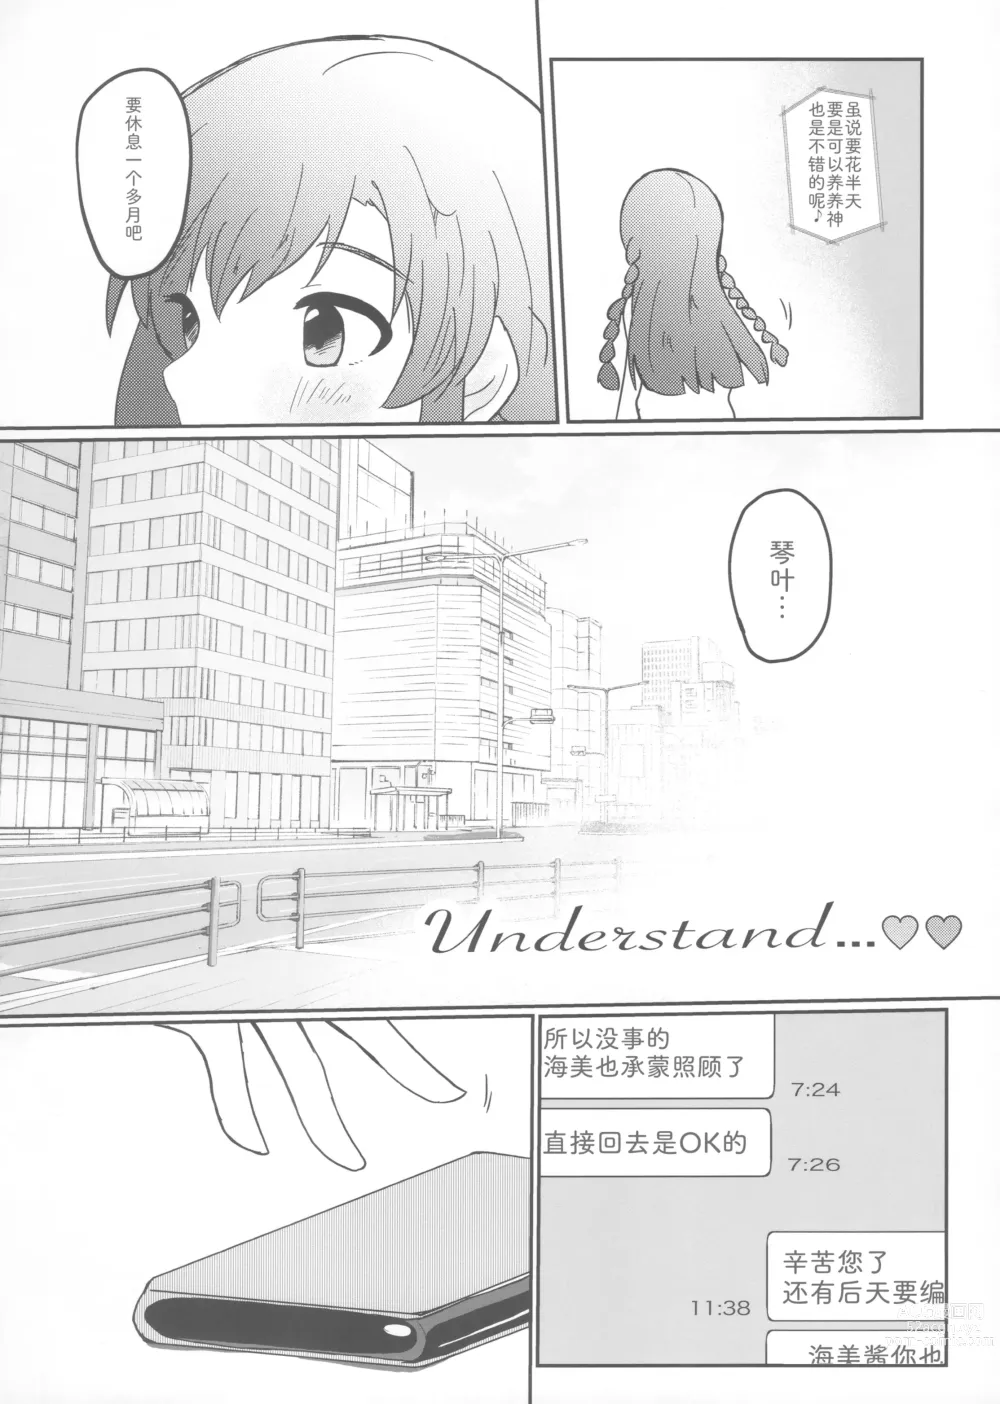 Page 3 of doujinshi Understand...